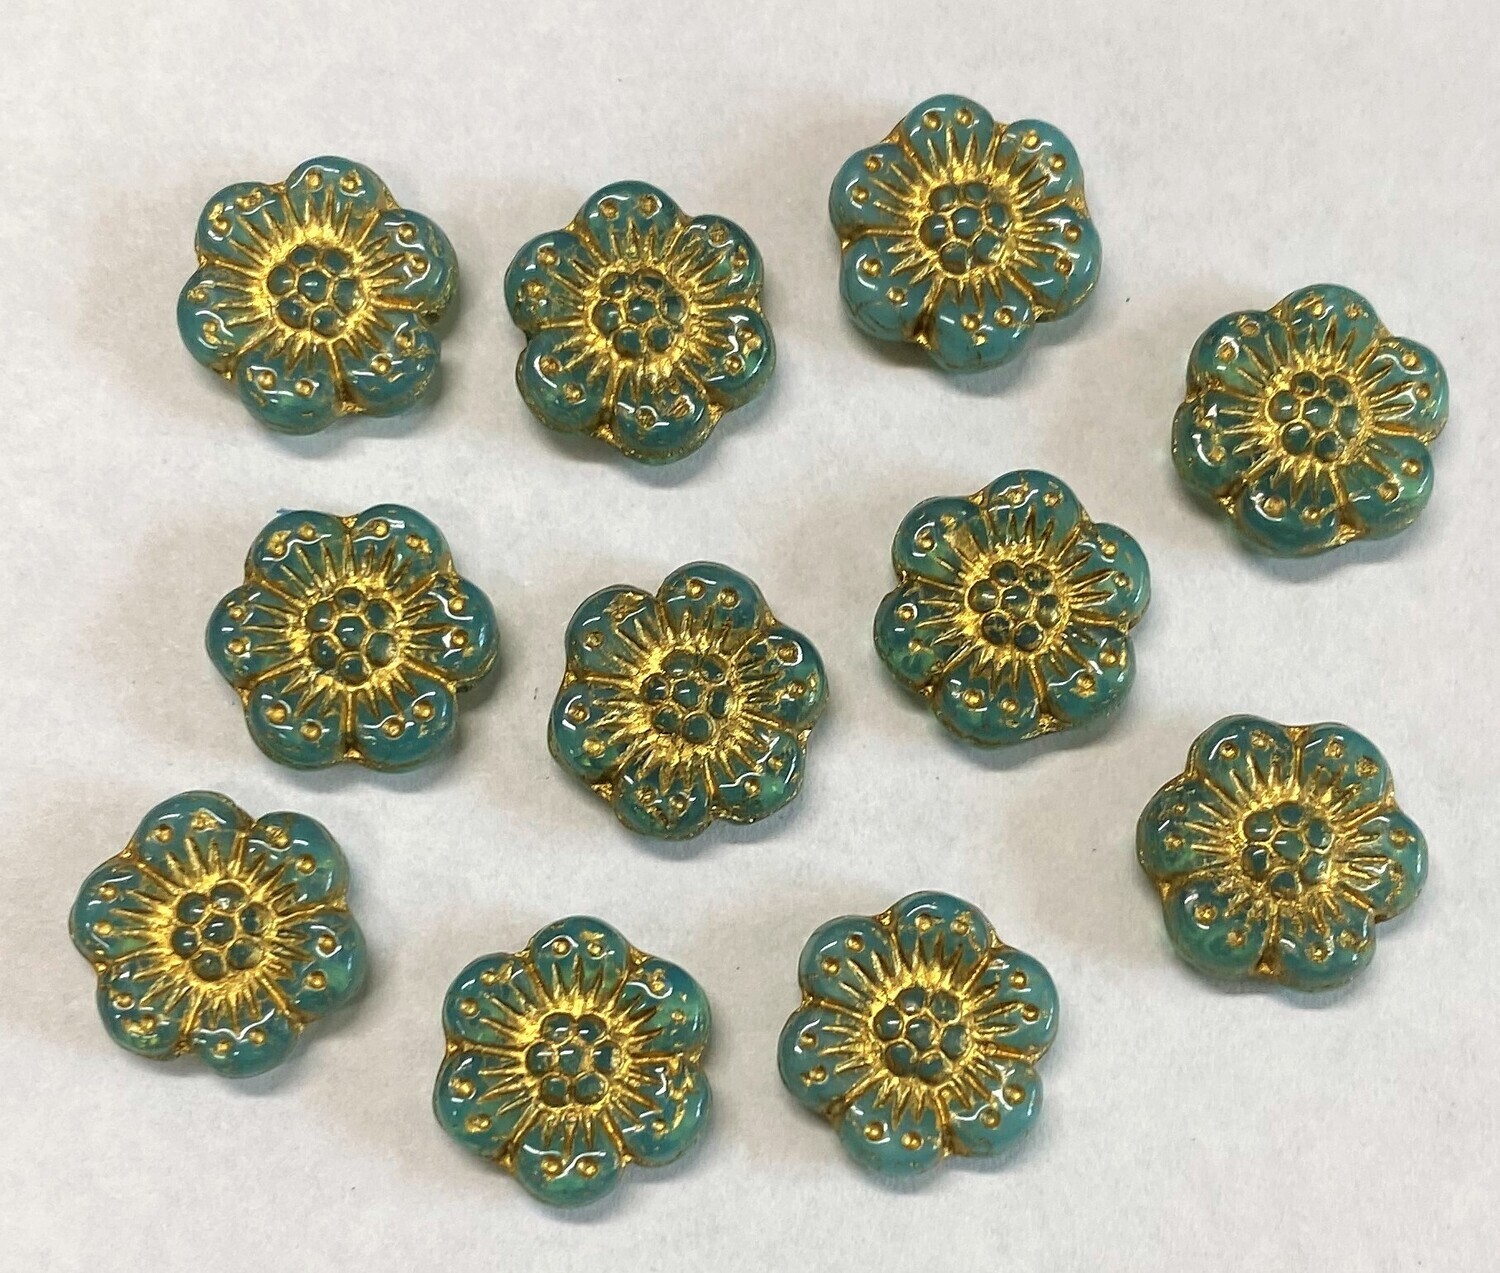 Teal Czech Glass Flowers with Gold